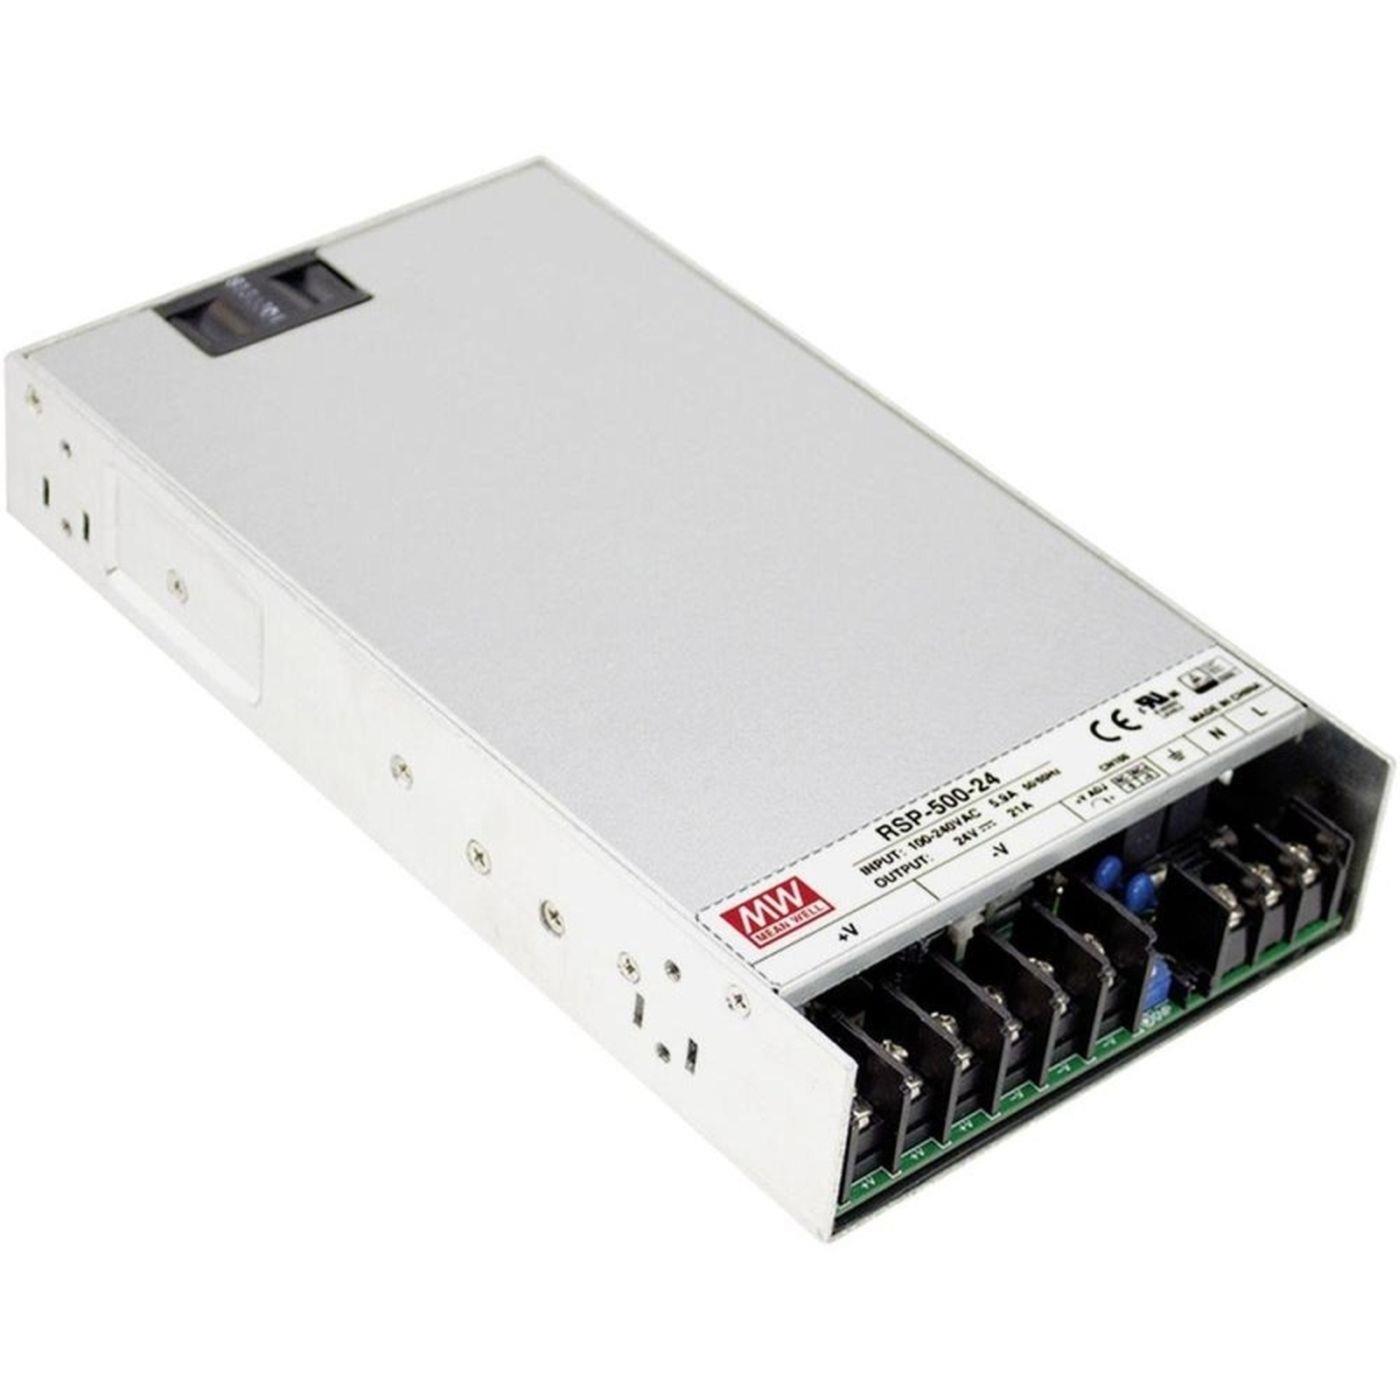 RSP-500-12 500W 12V 41,7A Industrial power supply